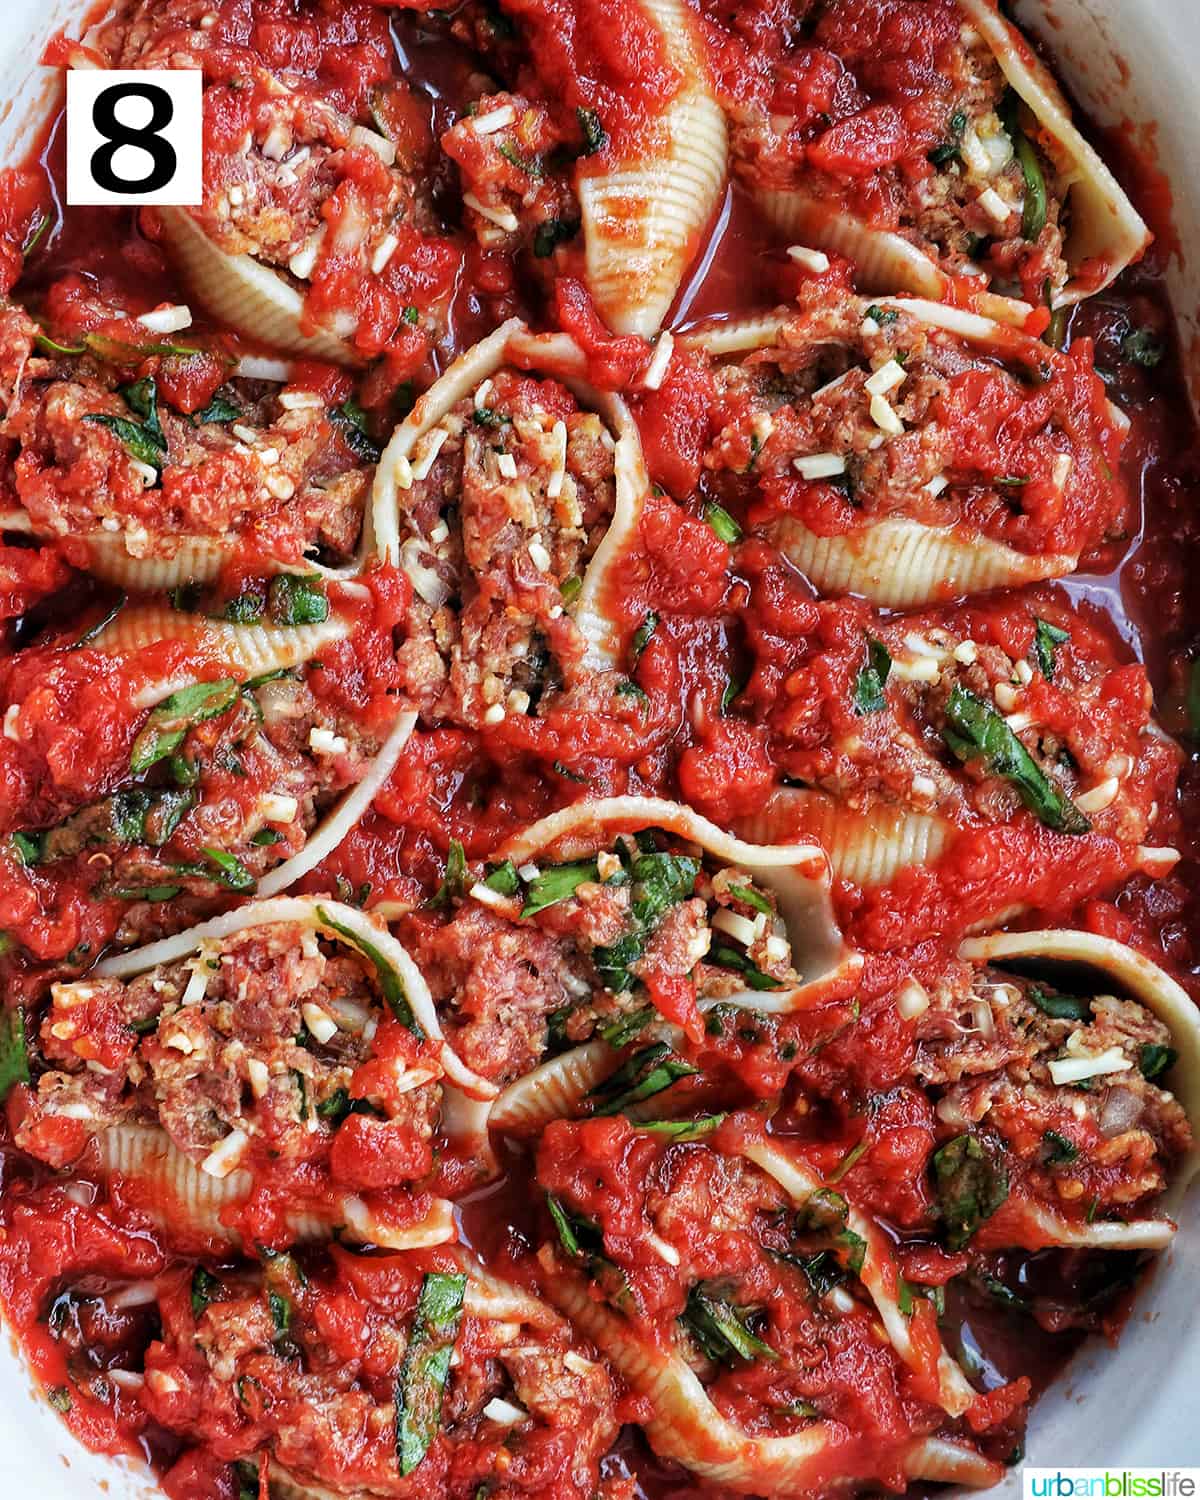 stuffed shells with ground beef topped with more marinara sauce.